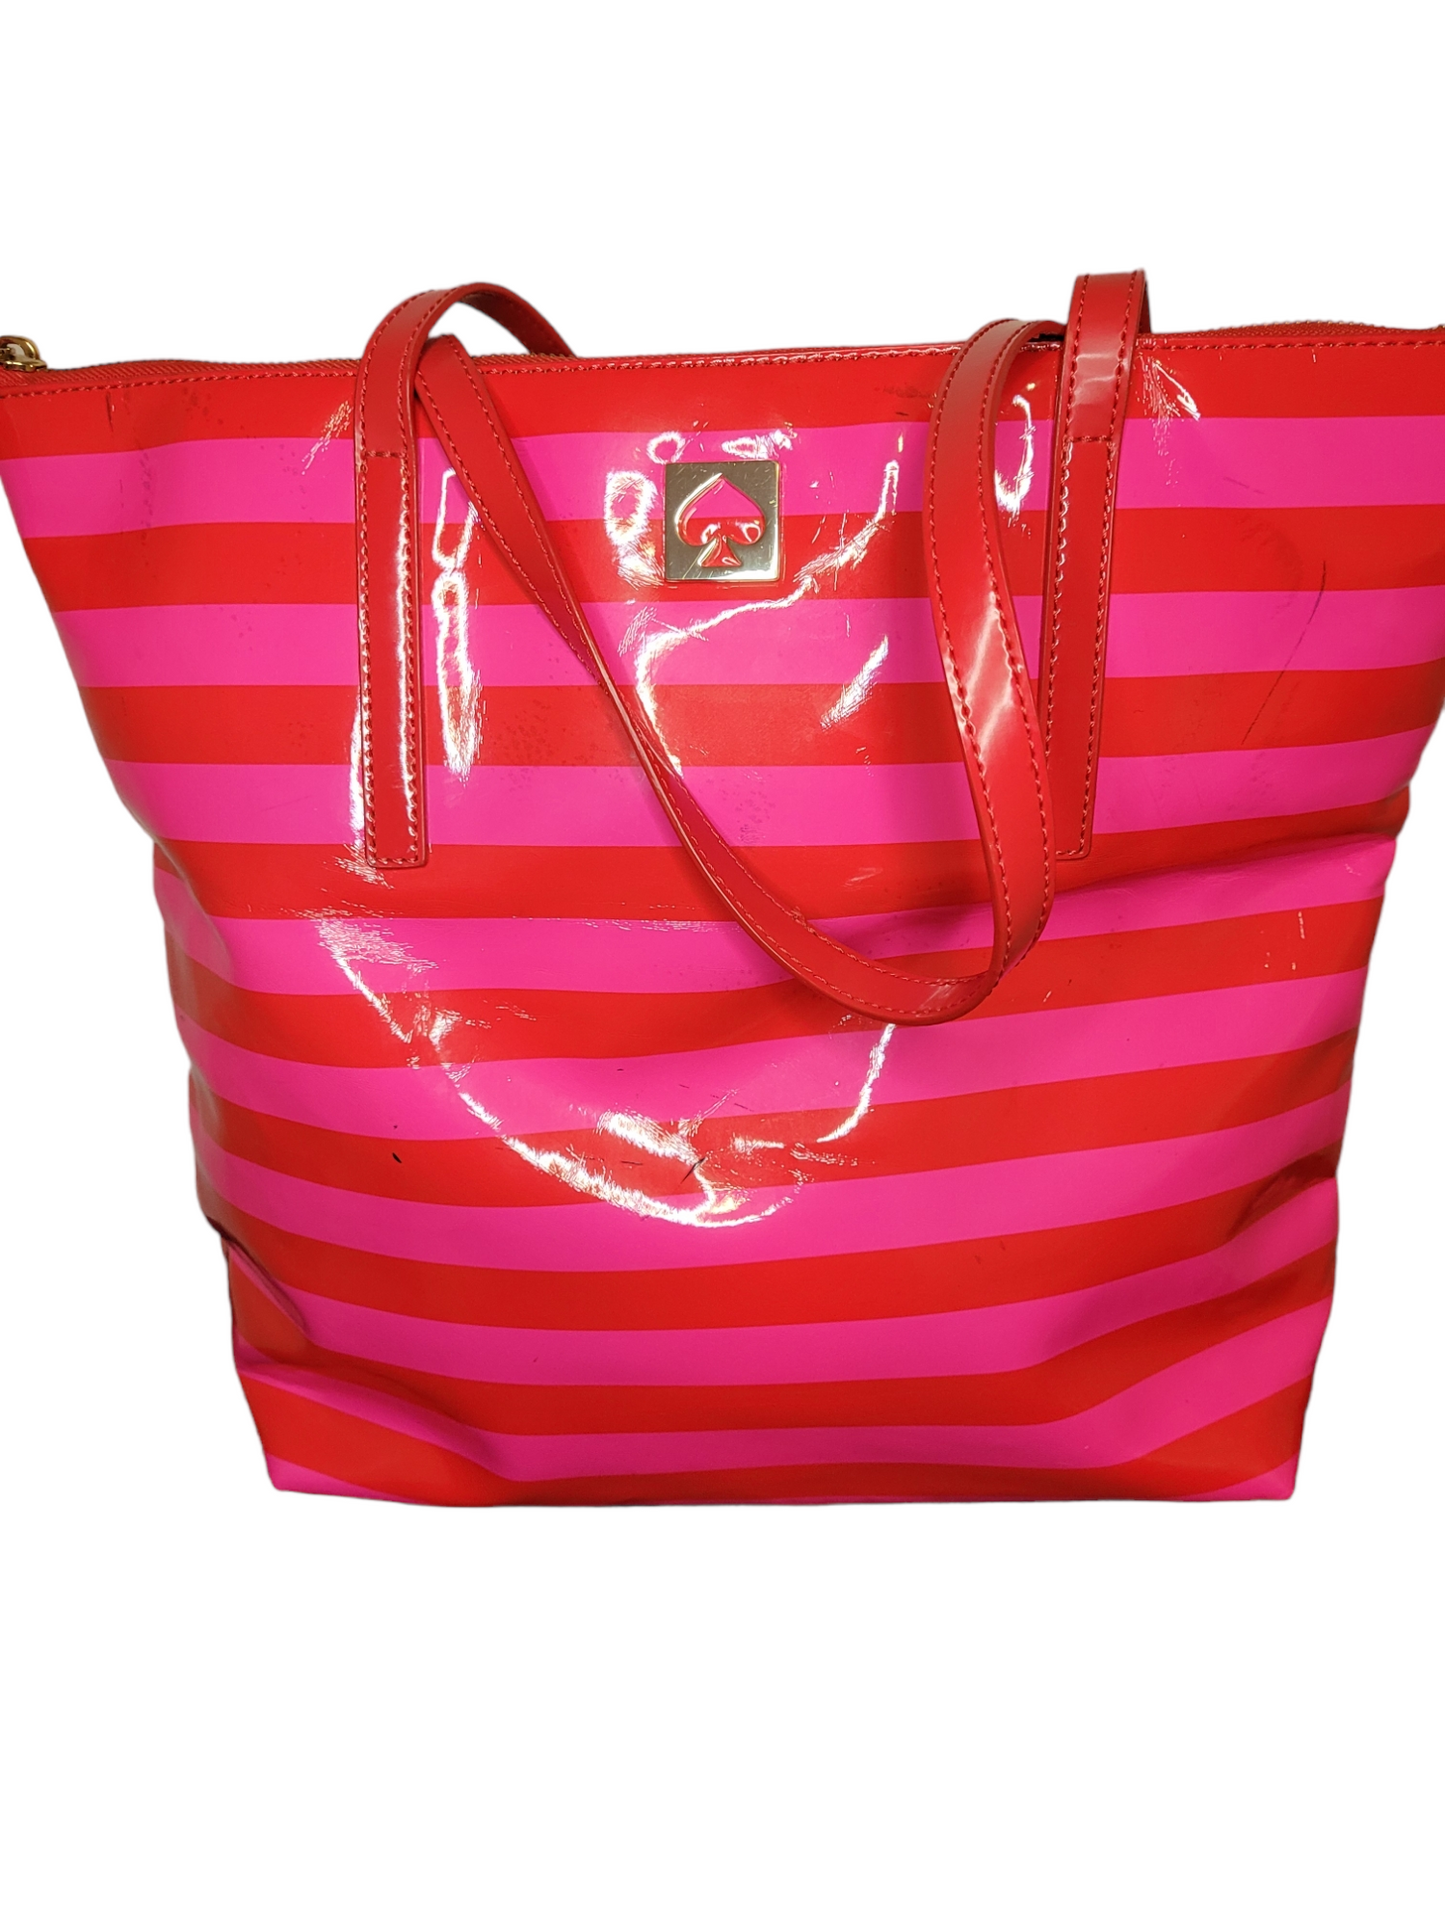 Kate Spade orange and pink striped tote bag – Stepping Out Again